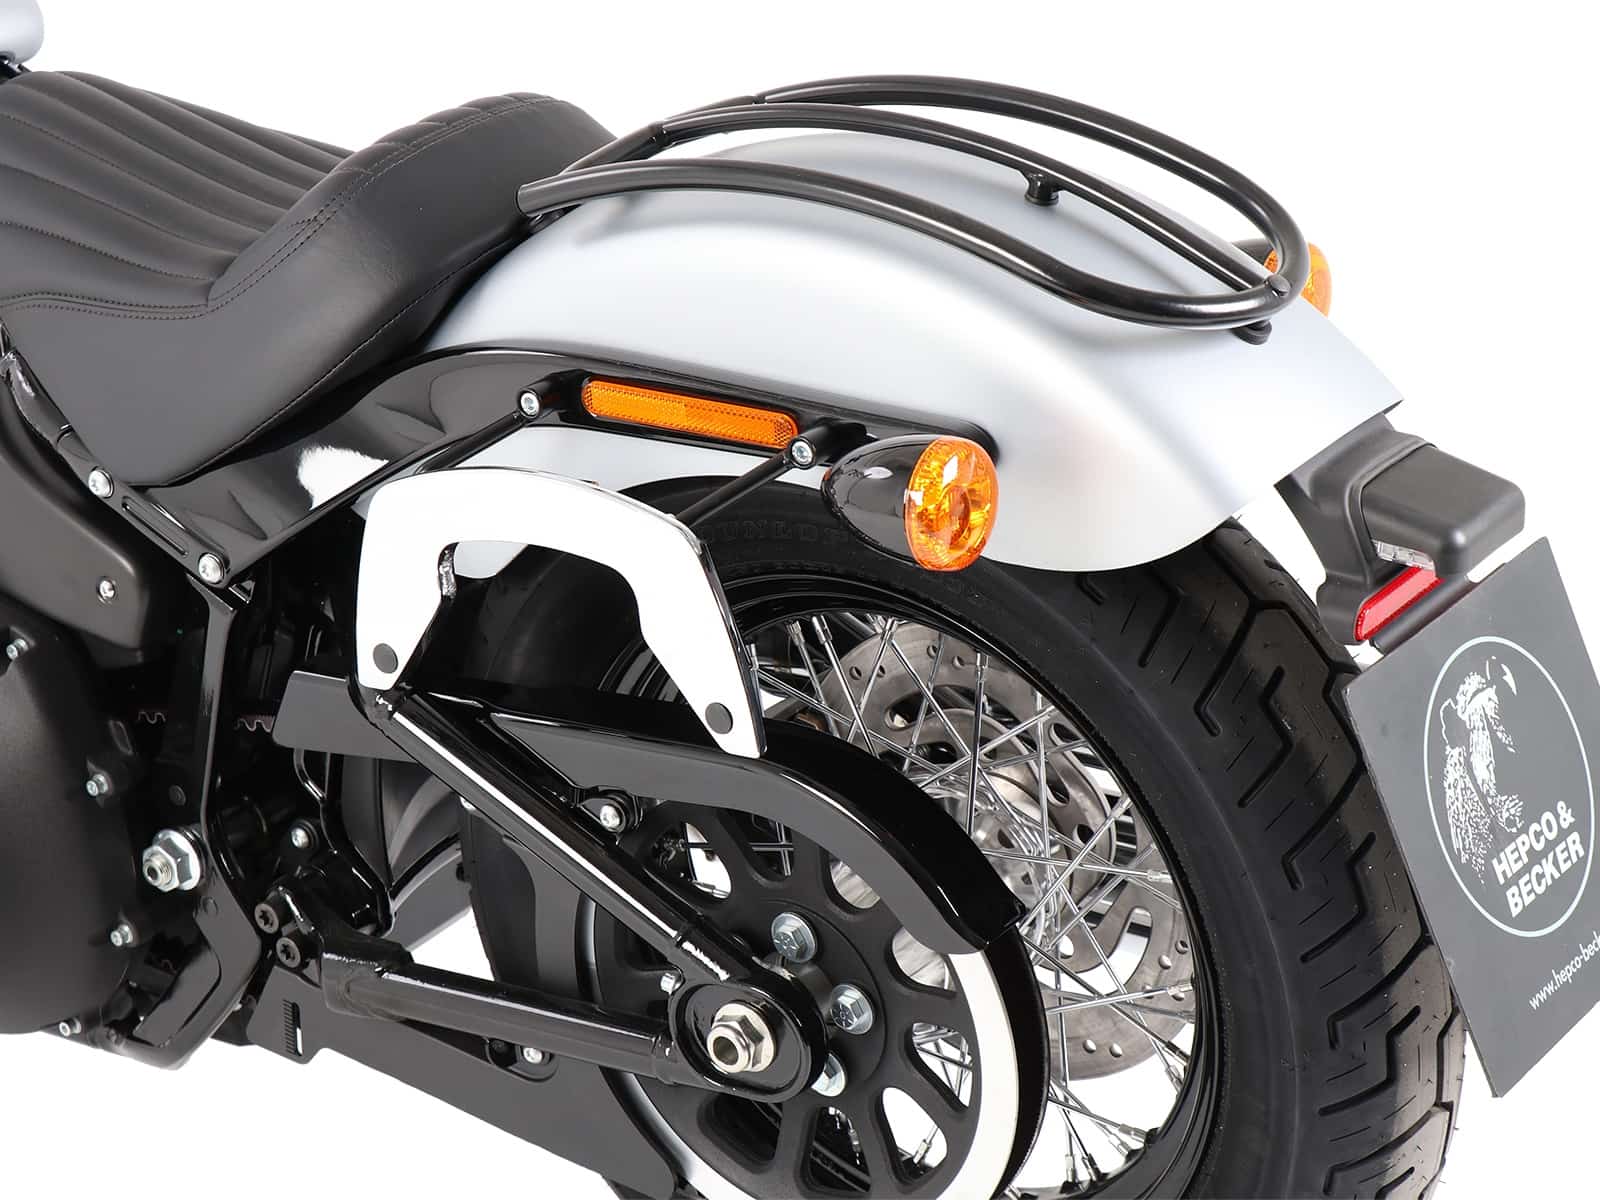 C-Bow sidecarrier chrome for Harley-Davidson Softaill Slim (2018-)